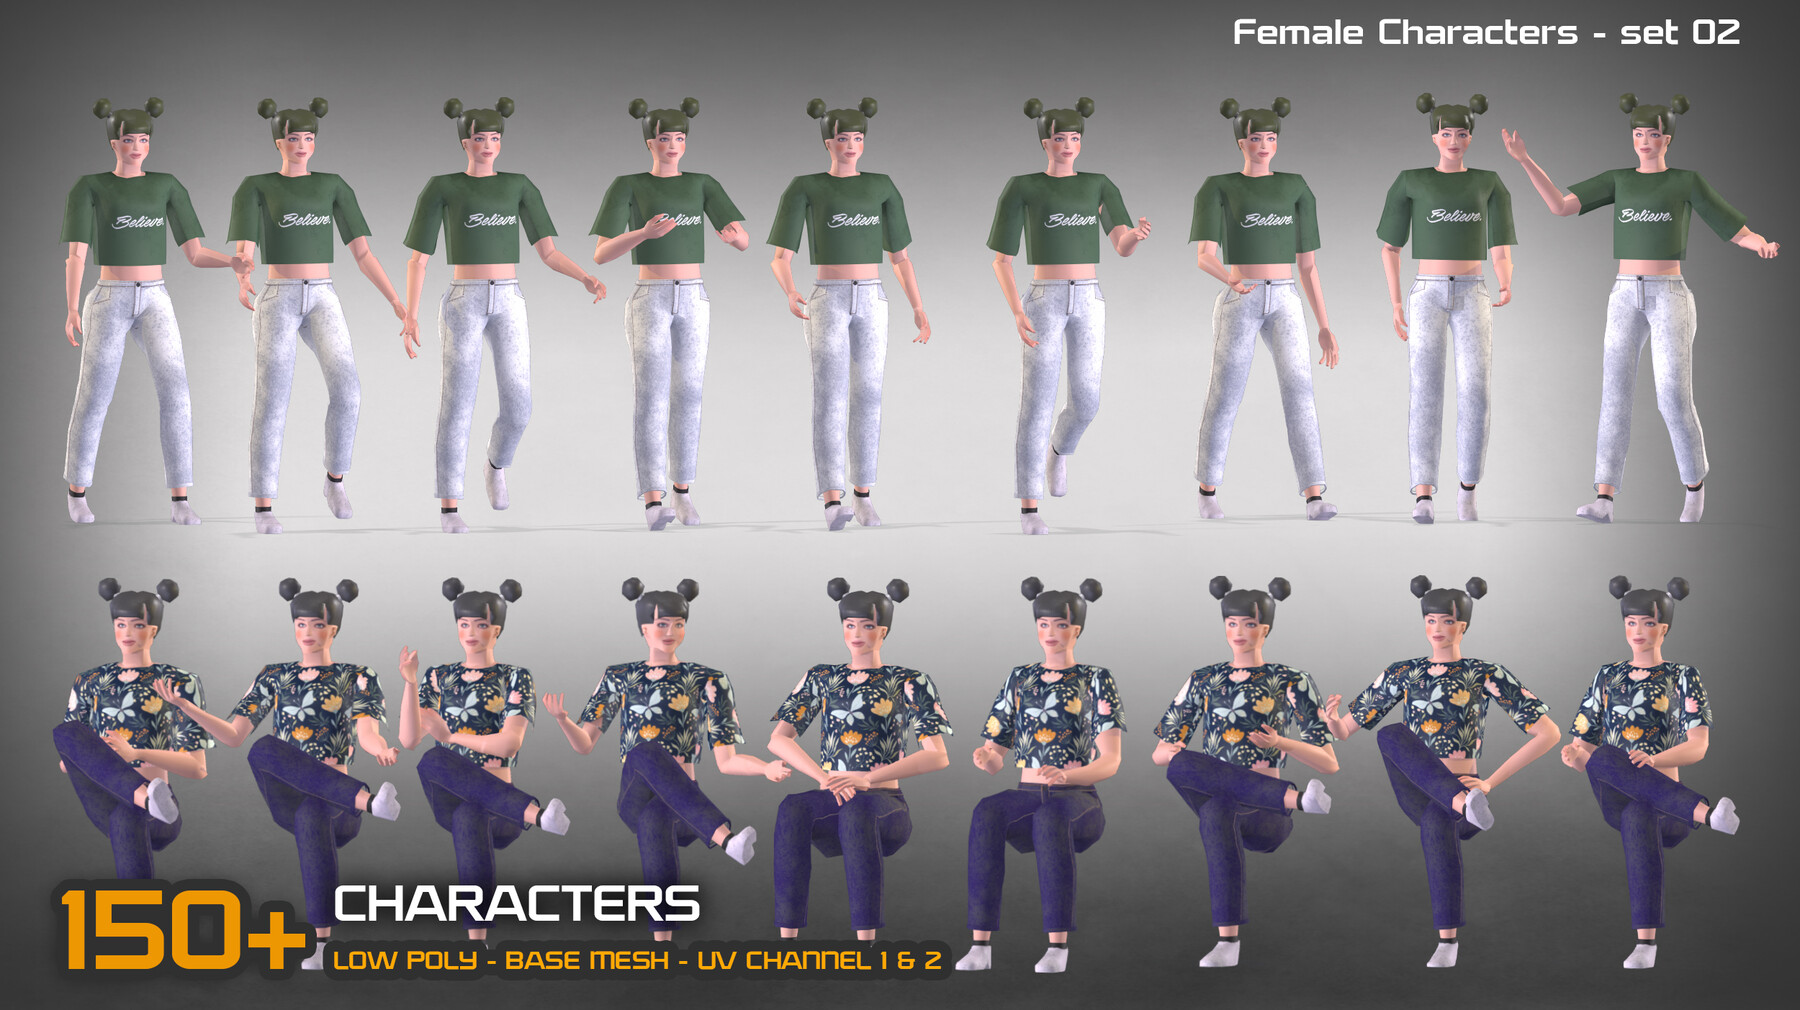 ArtStation - 150+ Female Characters -set 02 +PBR materials | Resources